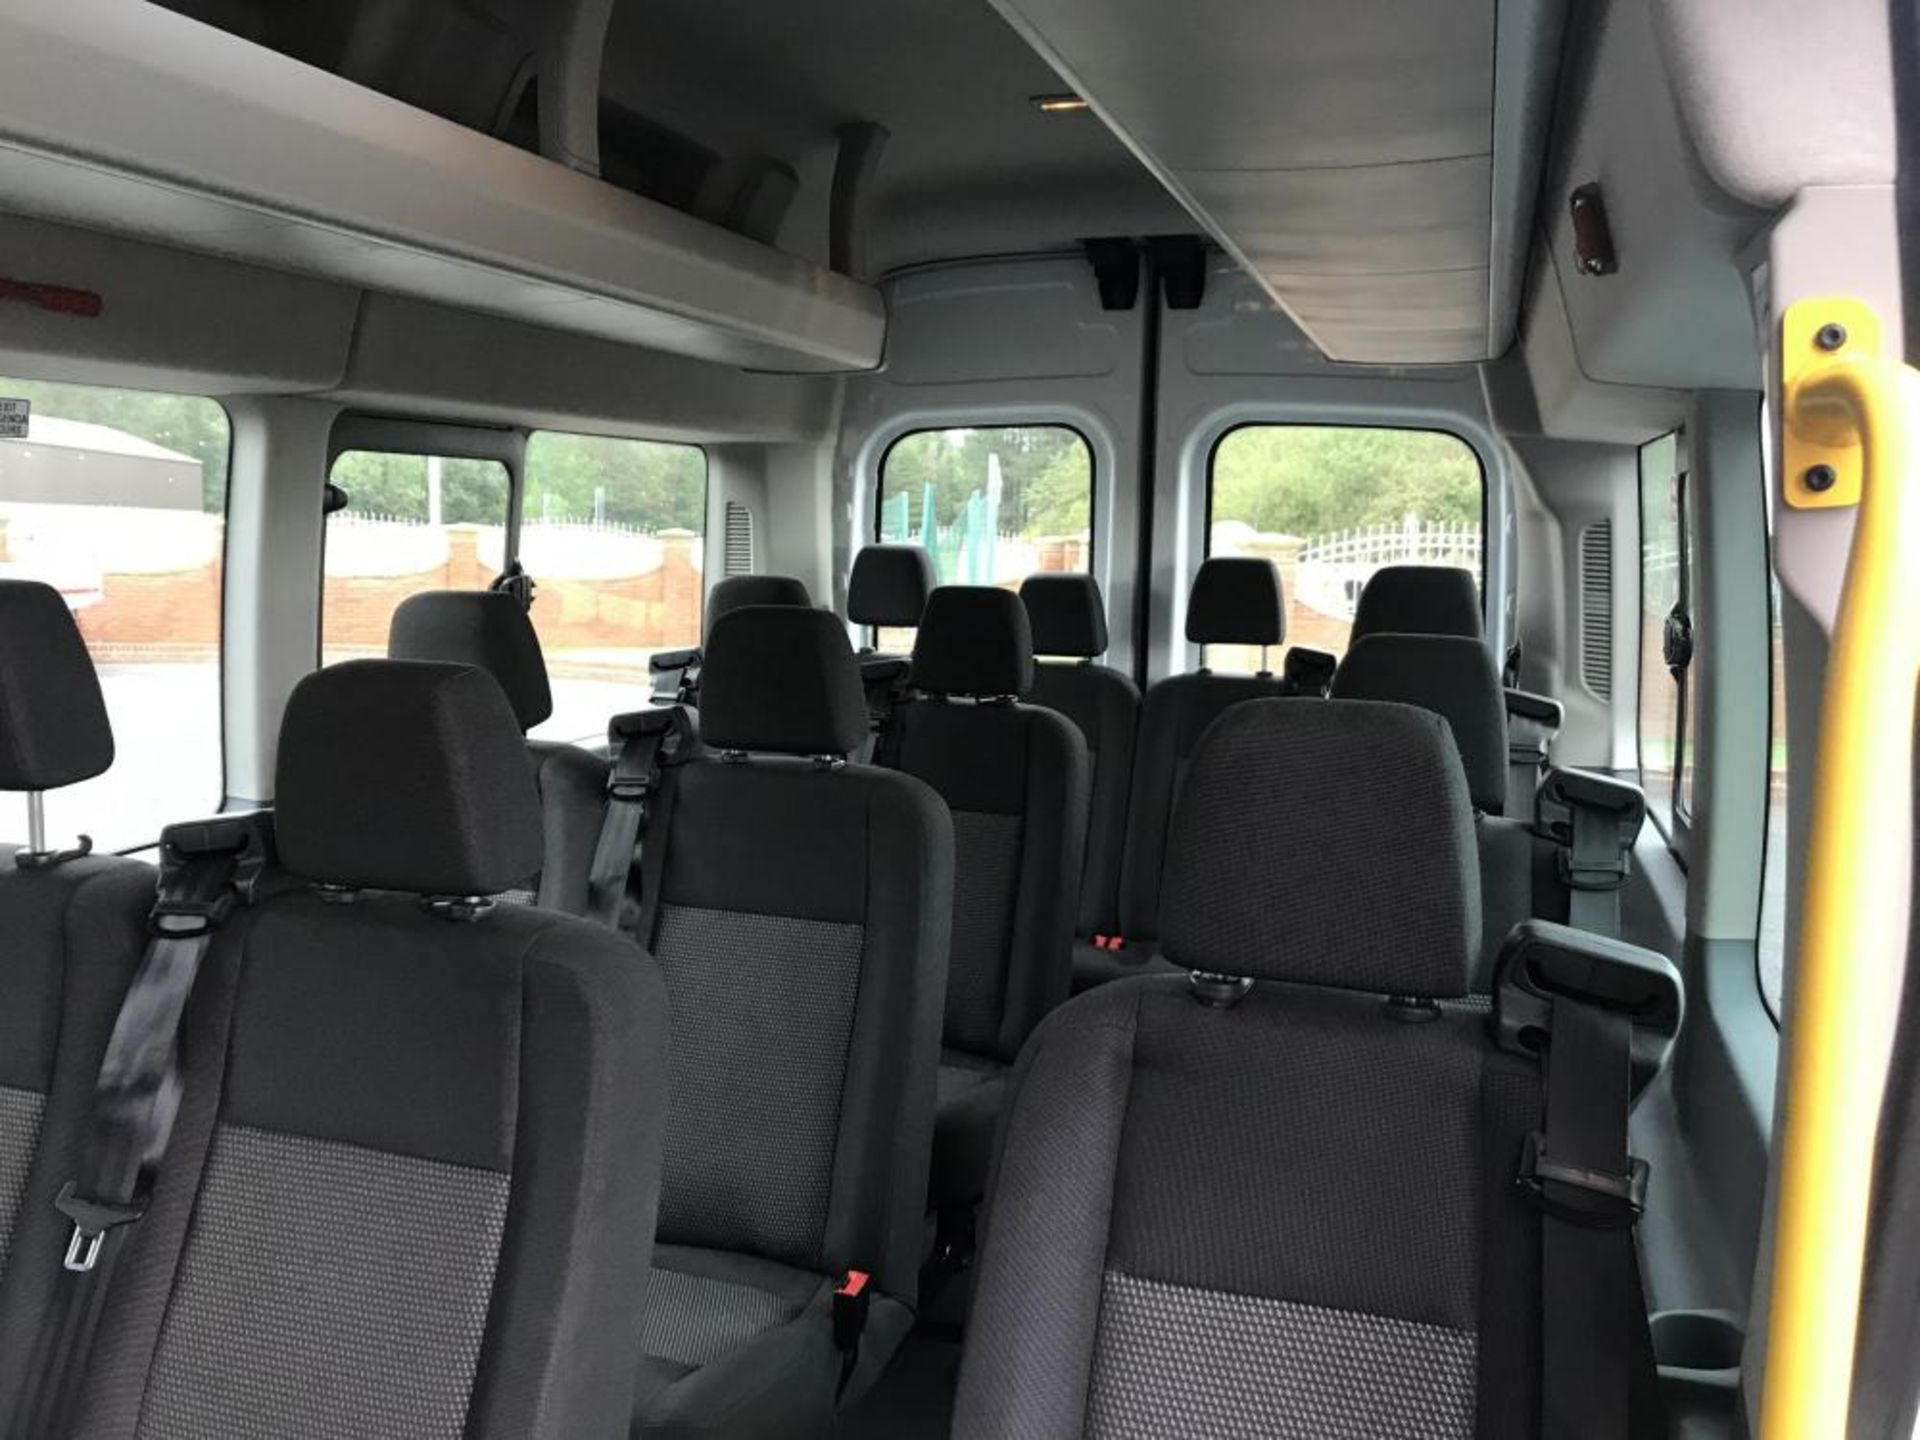 2017/17 REG FORD TRANSIT 460 ECONETIC TECH 2.2 DIESEL WHITE 17 SEAT MINIBUS, SHOWING 0 FORMER KEEPER - Image 13 of 17